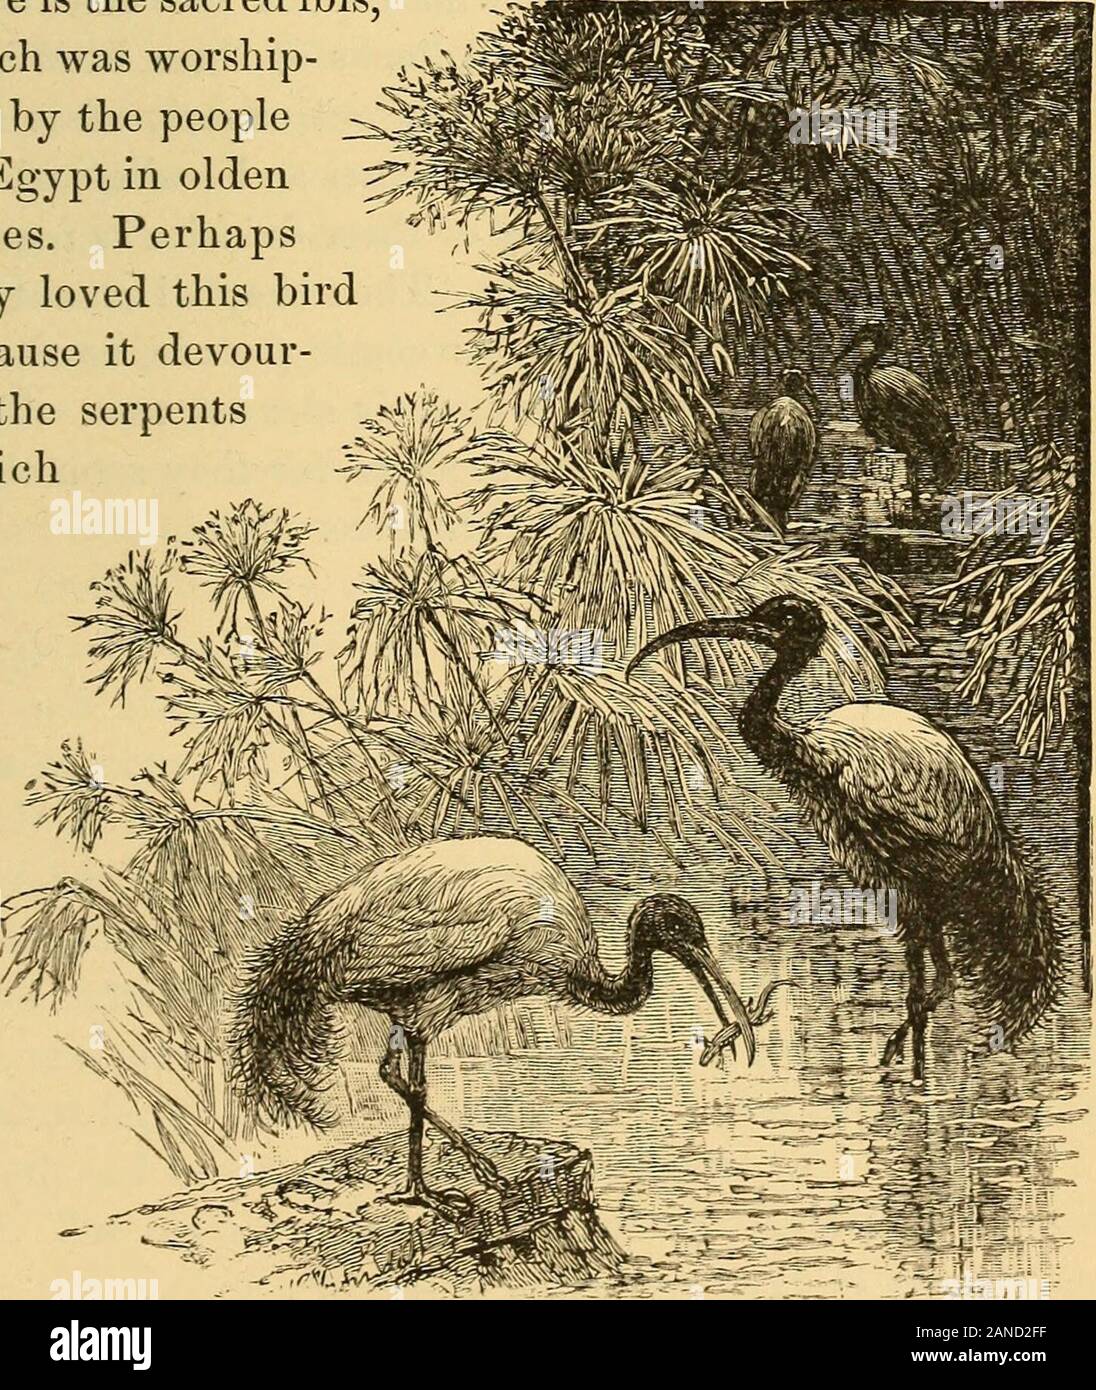 Animal life in the sea and on the land . Fisr. 183.—Storks Nkst. WAPING-BIRDS. 275 for itself the reputation of being very greedy, and notwithout good cause, as you will see. With its strong hillit kills a great many small animals, which form its favor-ite food. As these victims of the voracious bird lie floatingon the water round about the scene of their destruction,the ibis swallows as many as it can well take, and thenstands stupidly on the edge of the stream, waiting untilthis meal is digested before it is able to indulge in another. 7. The Sacred Ibis.—Thenthere is the sacred ibis,which w Stock Photo